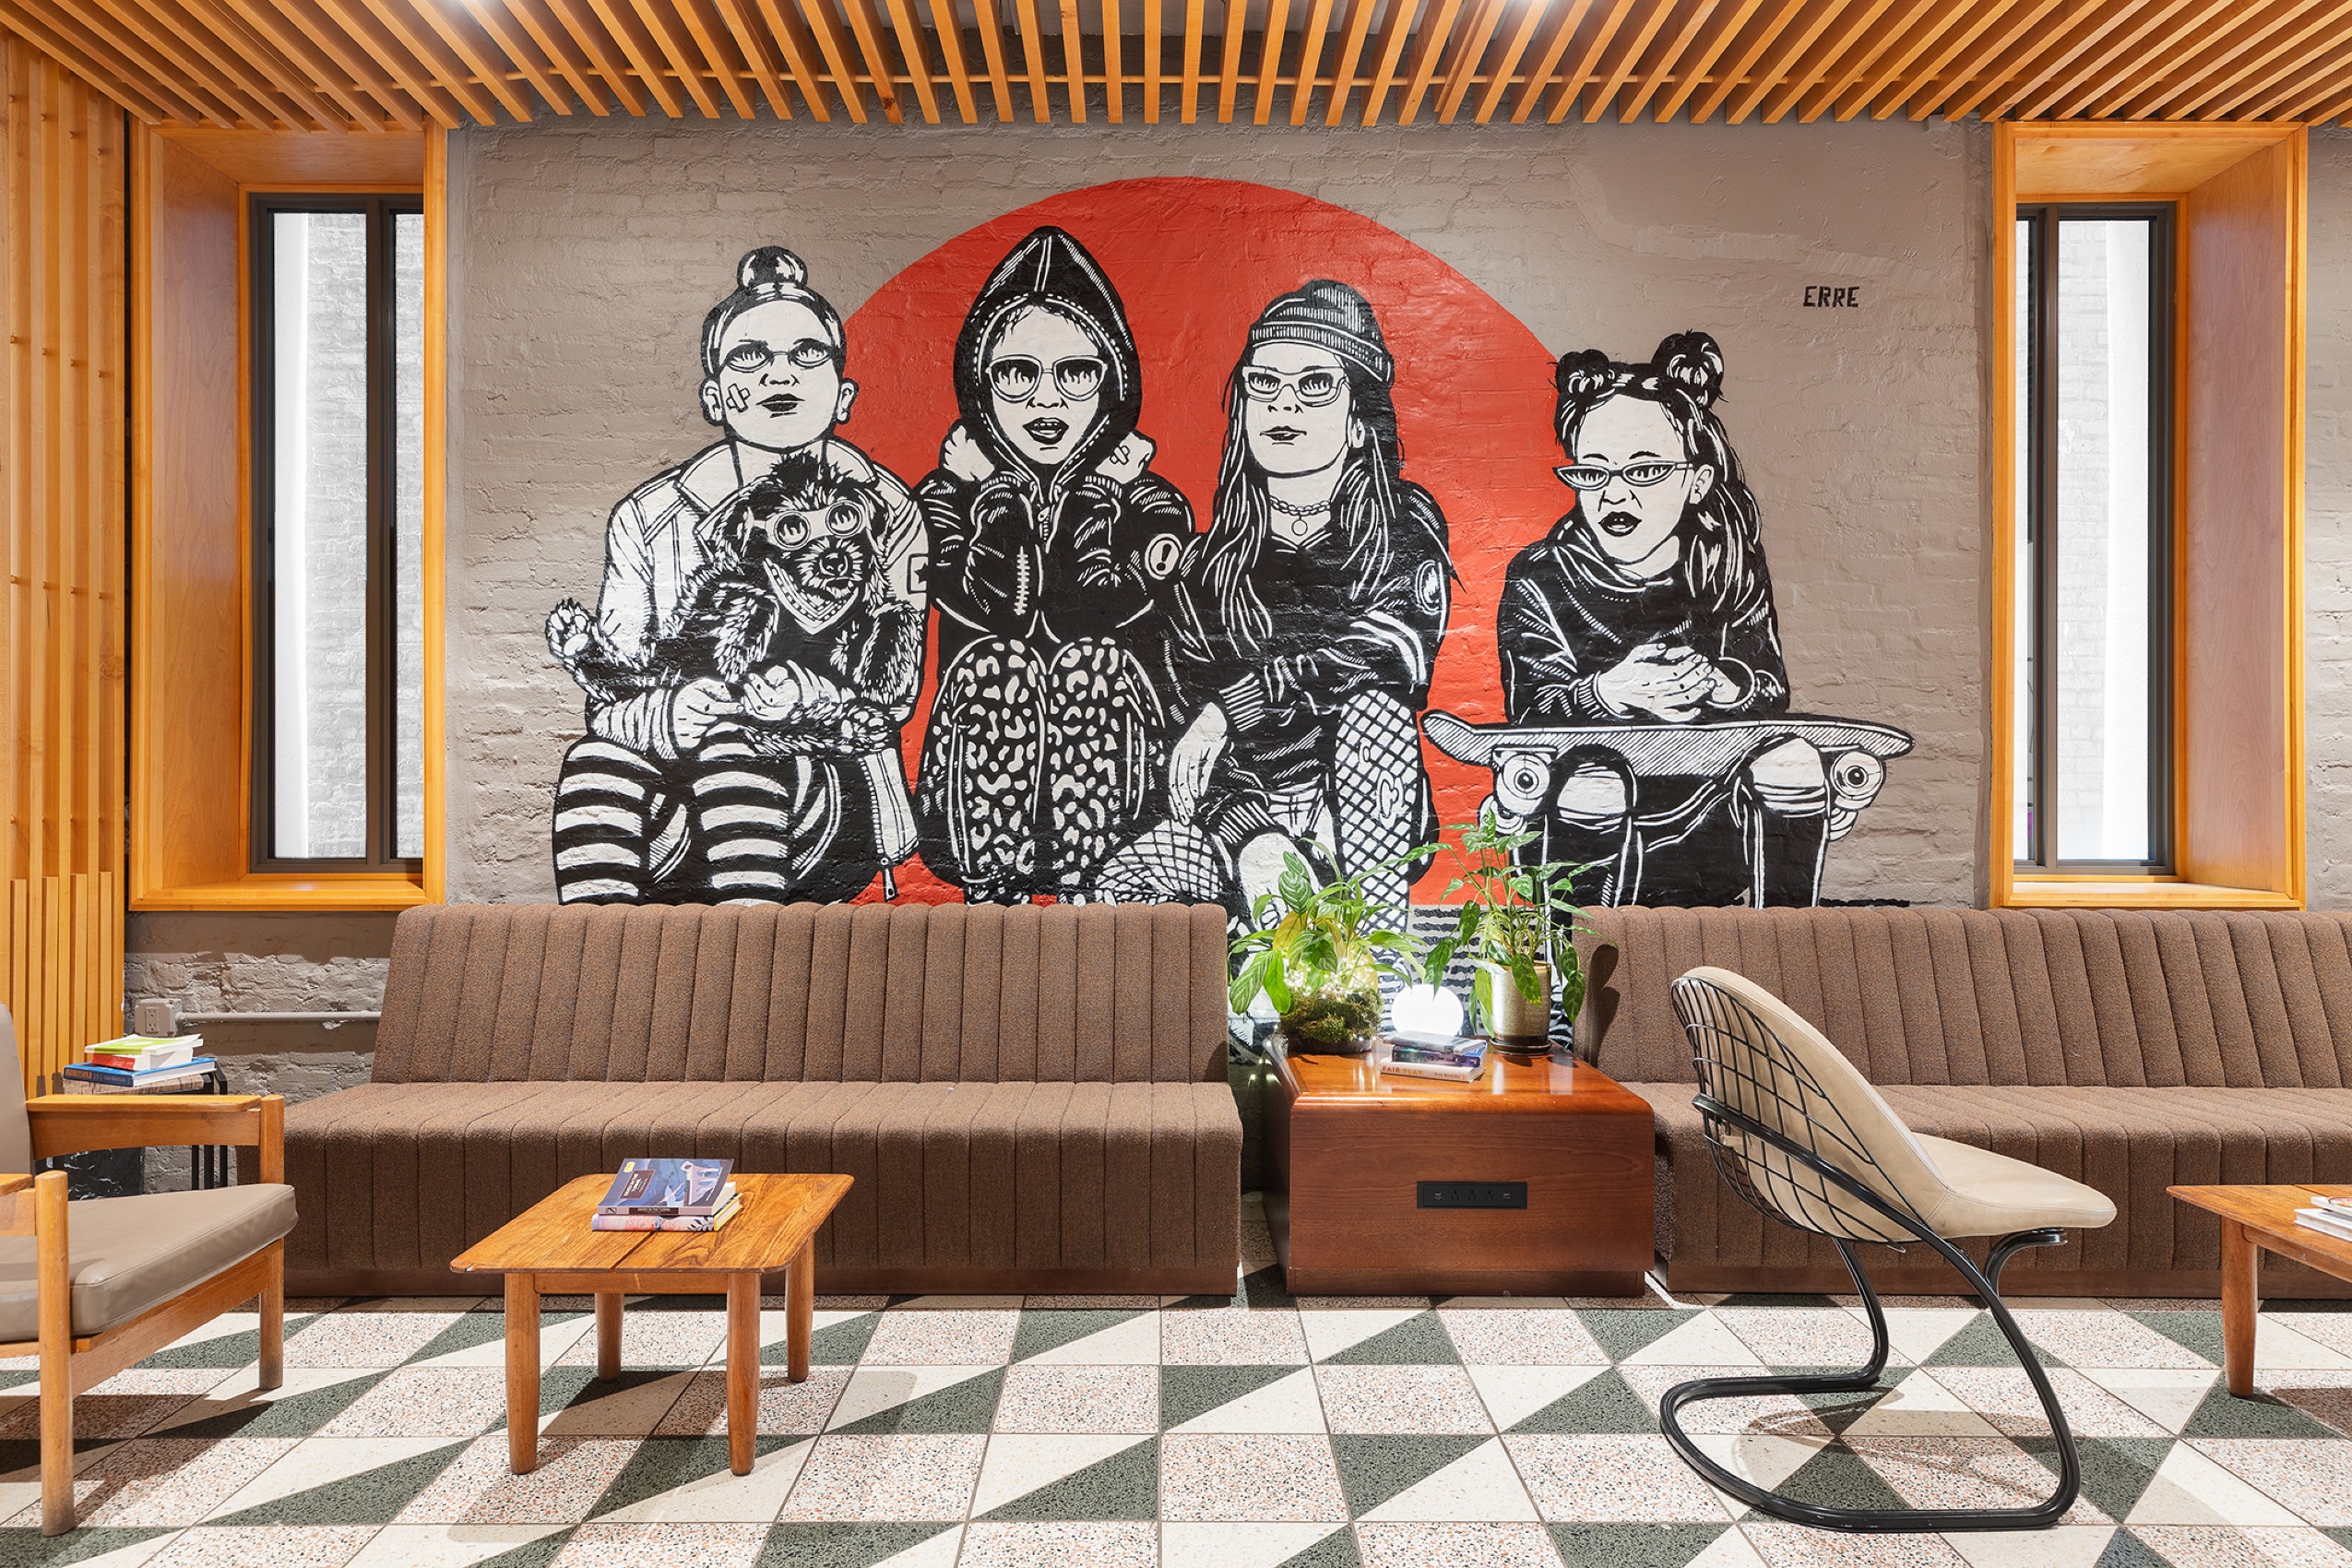 This stylish, inexpensive city boutique resort is situated on a picturesque graffiti-lined alley in New York Metropolis – Above-average motels